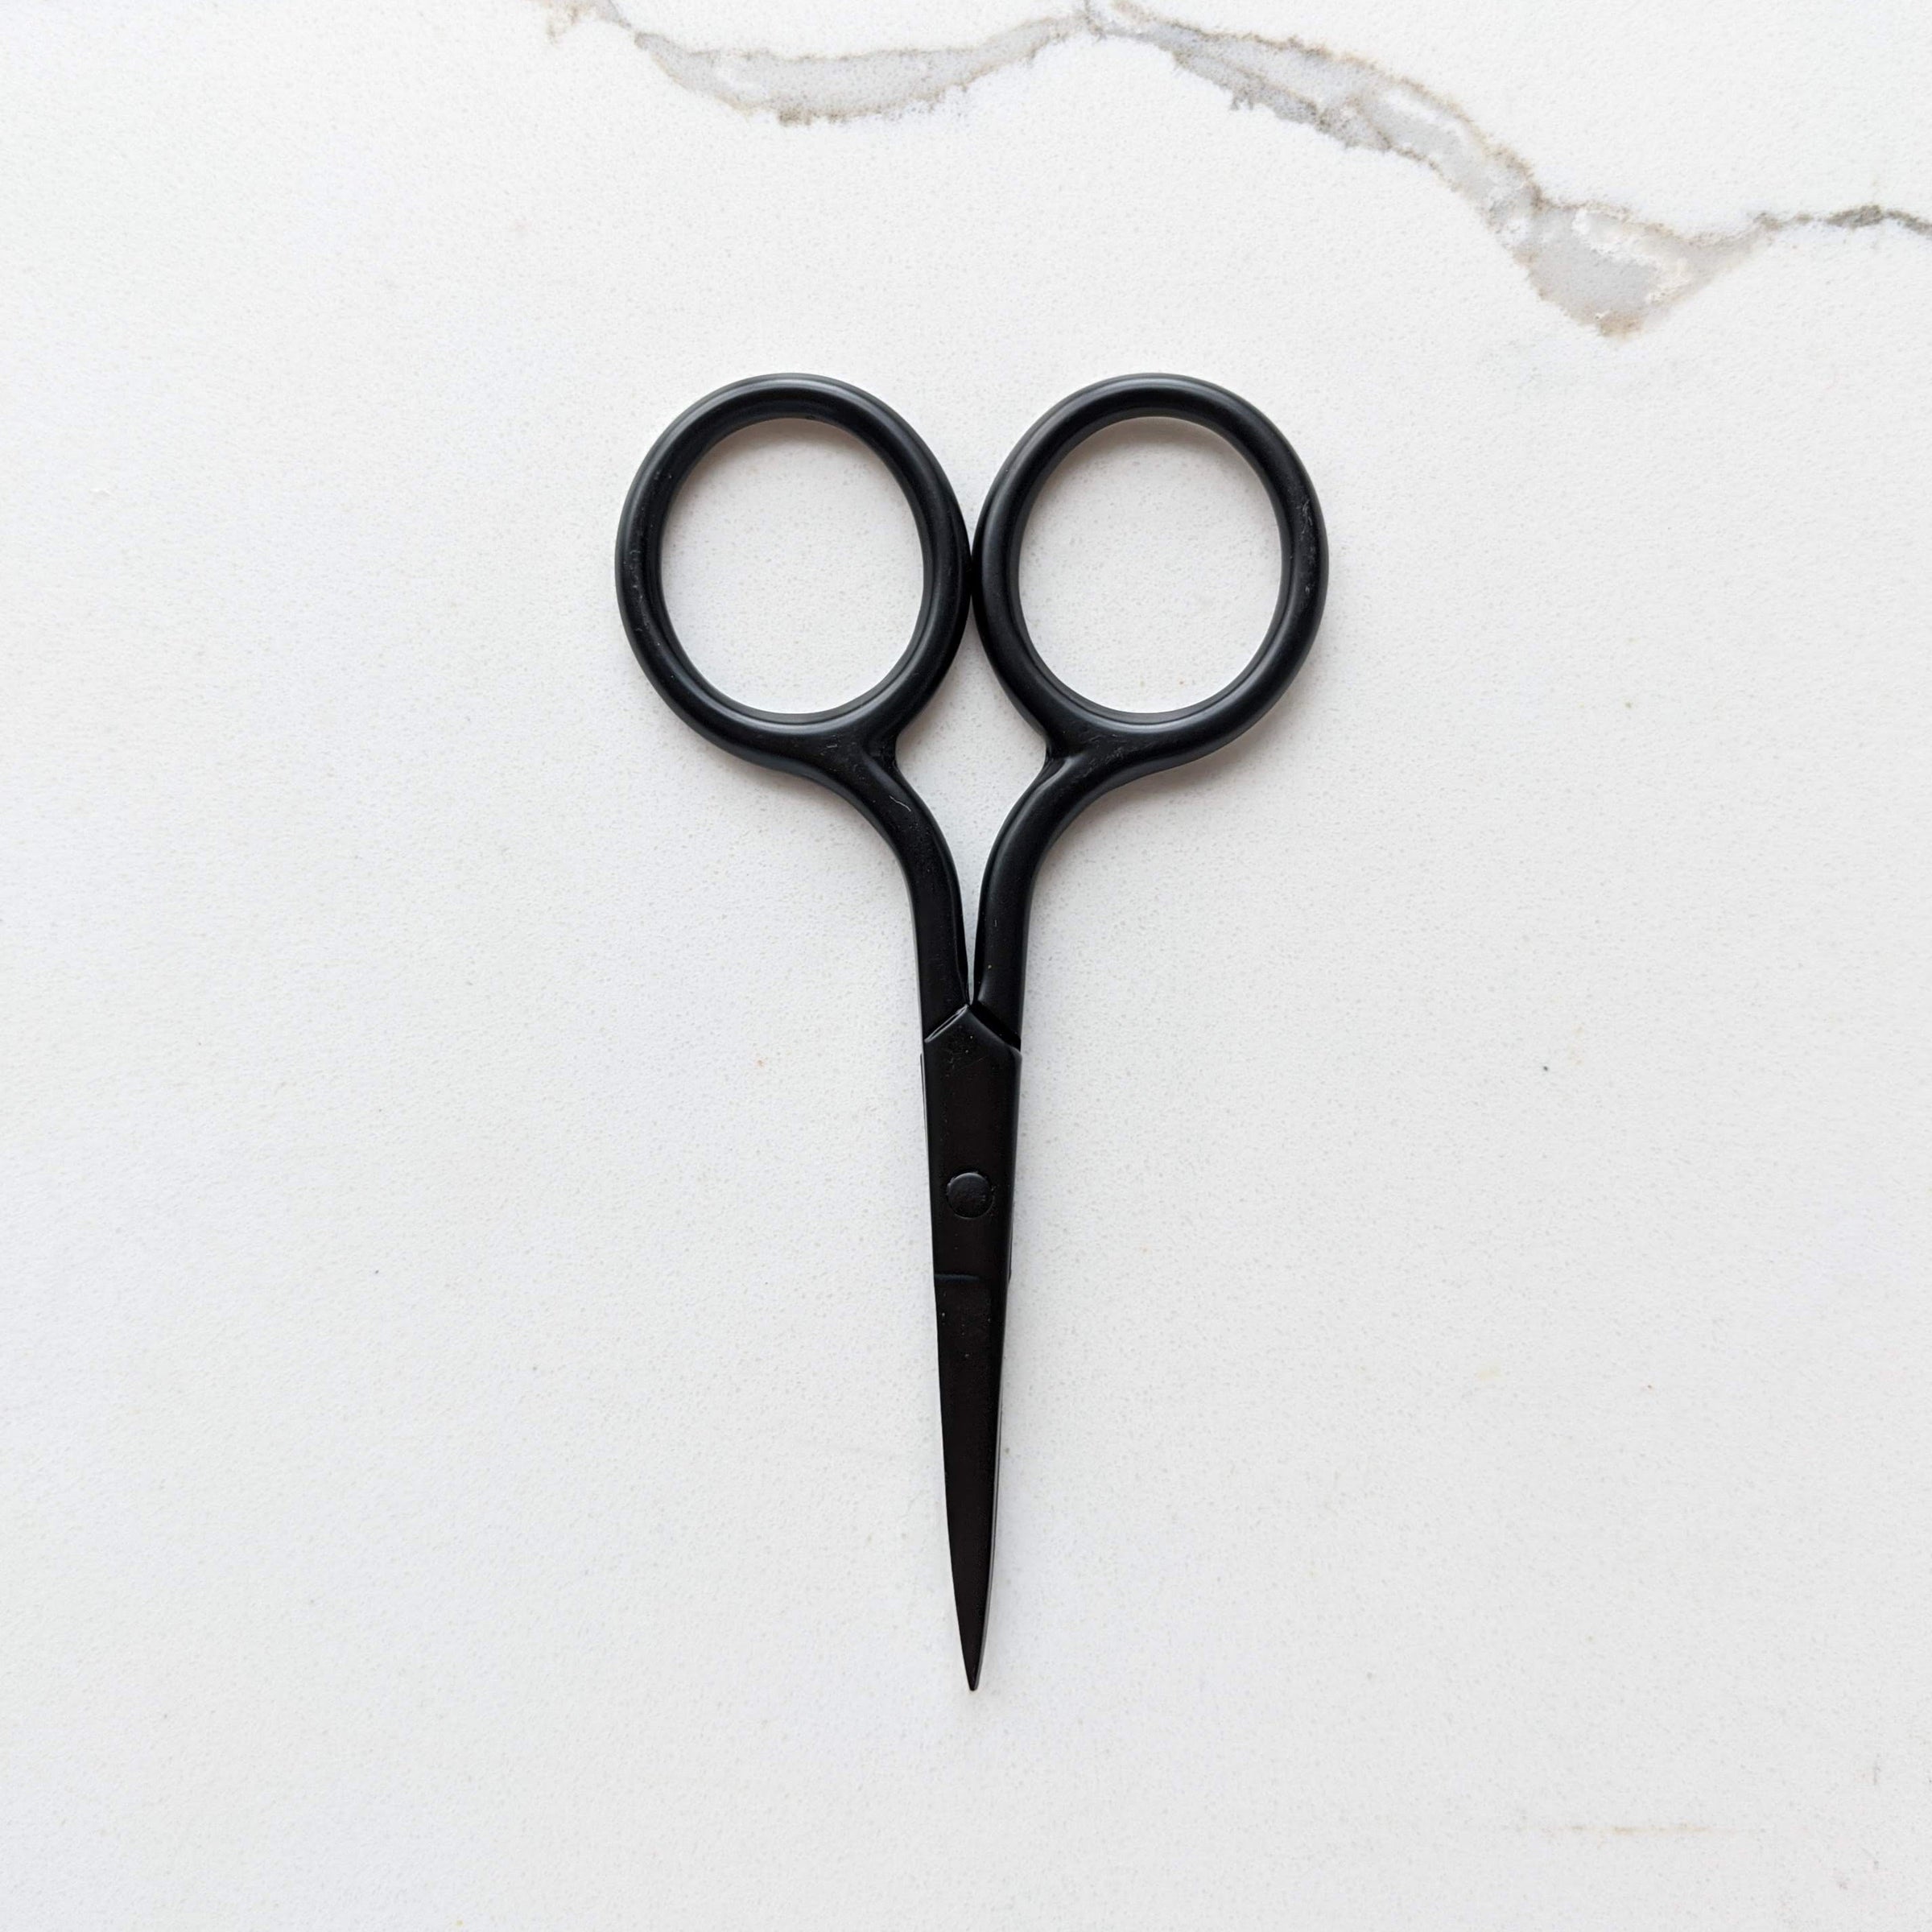 Embroidery Scissors - A Threaded Needle